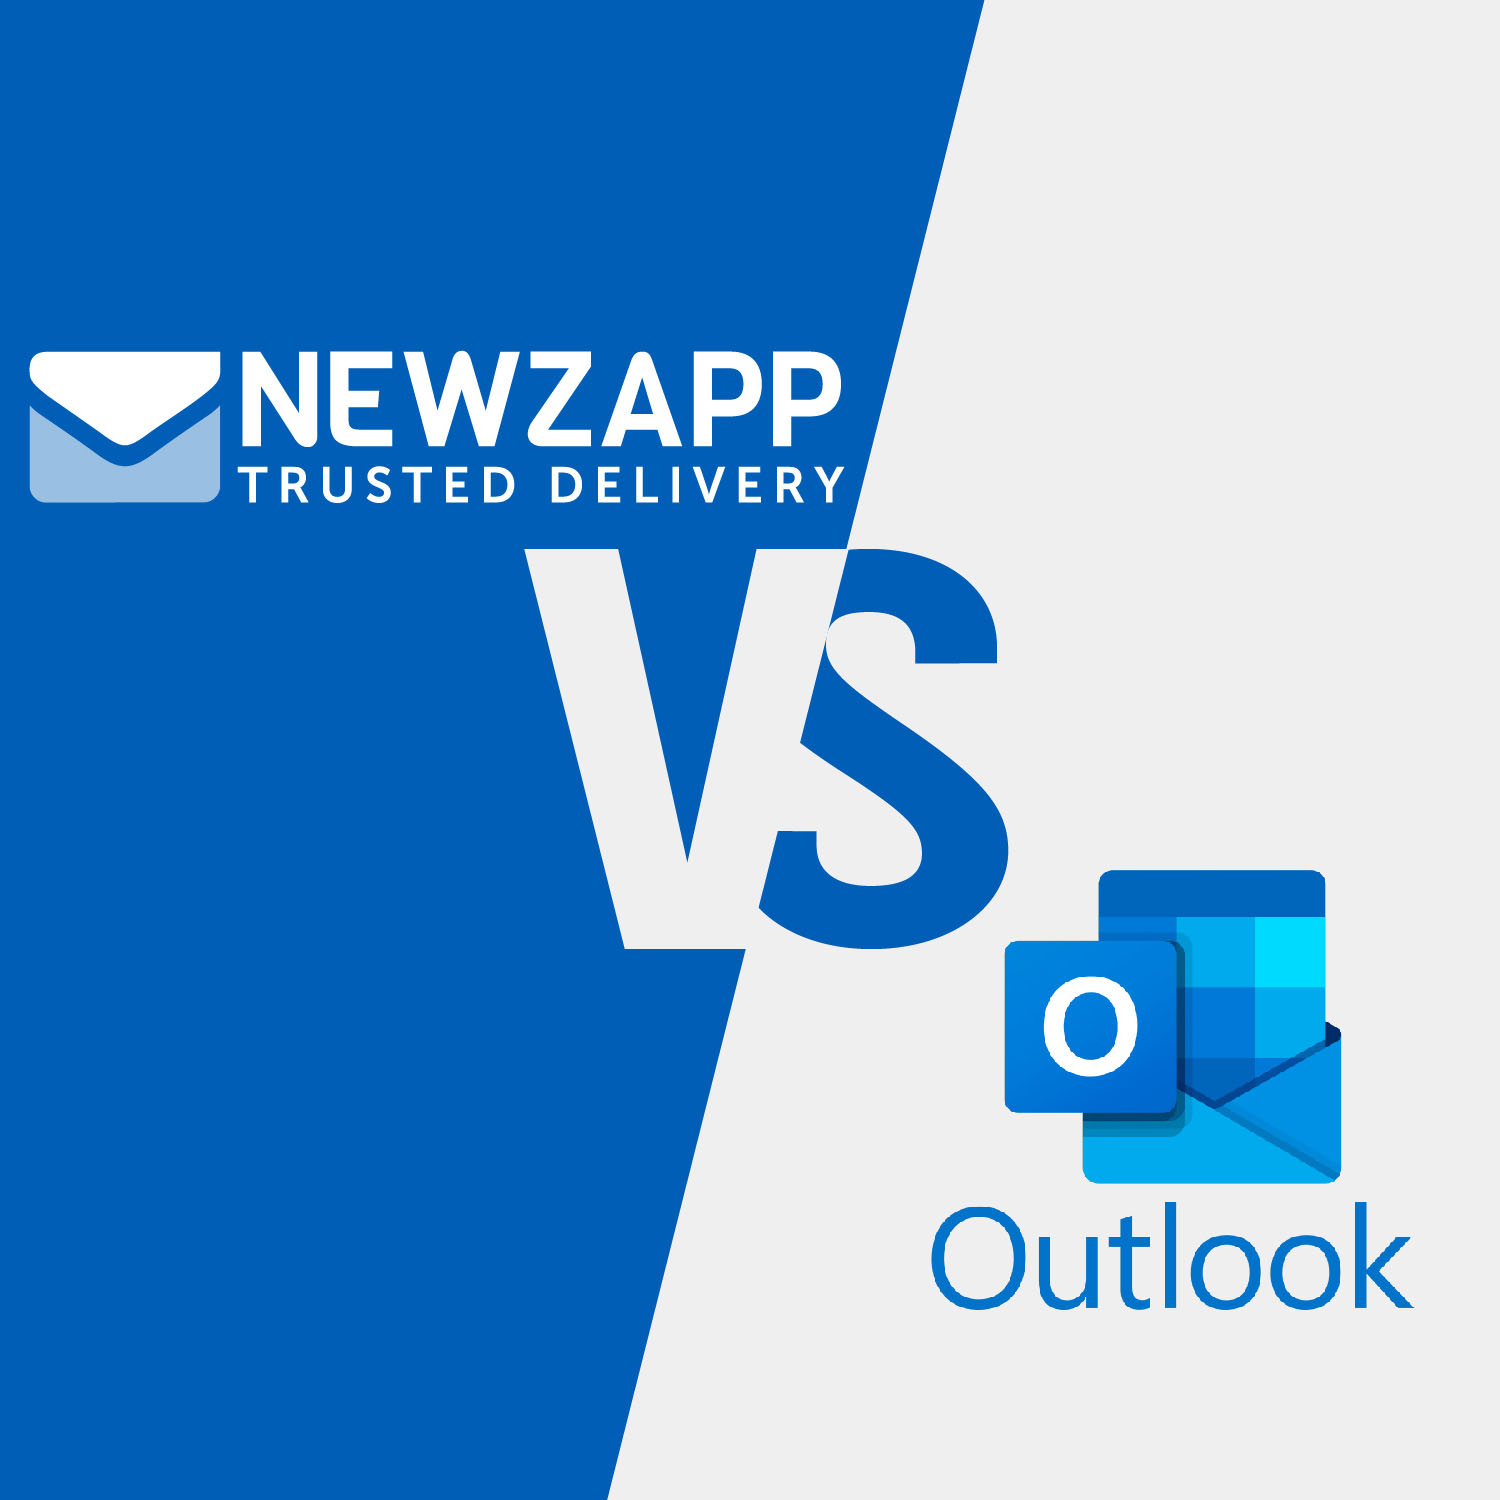 trusted-delivery-or-outlook